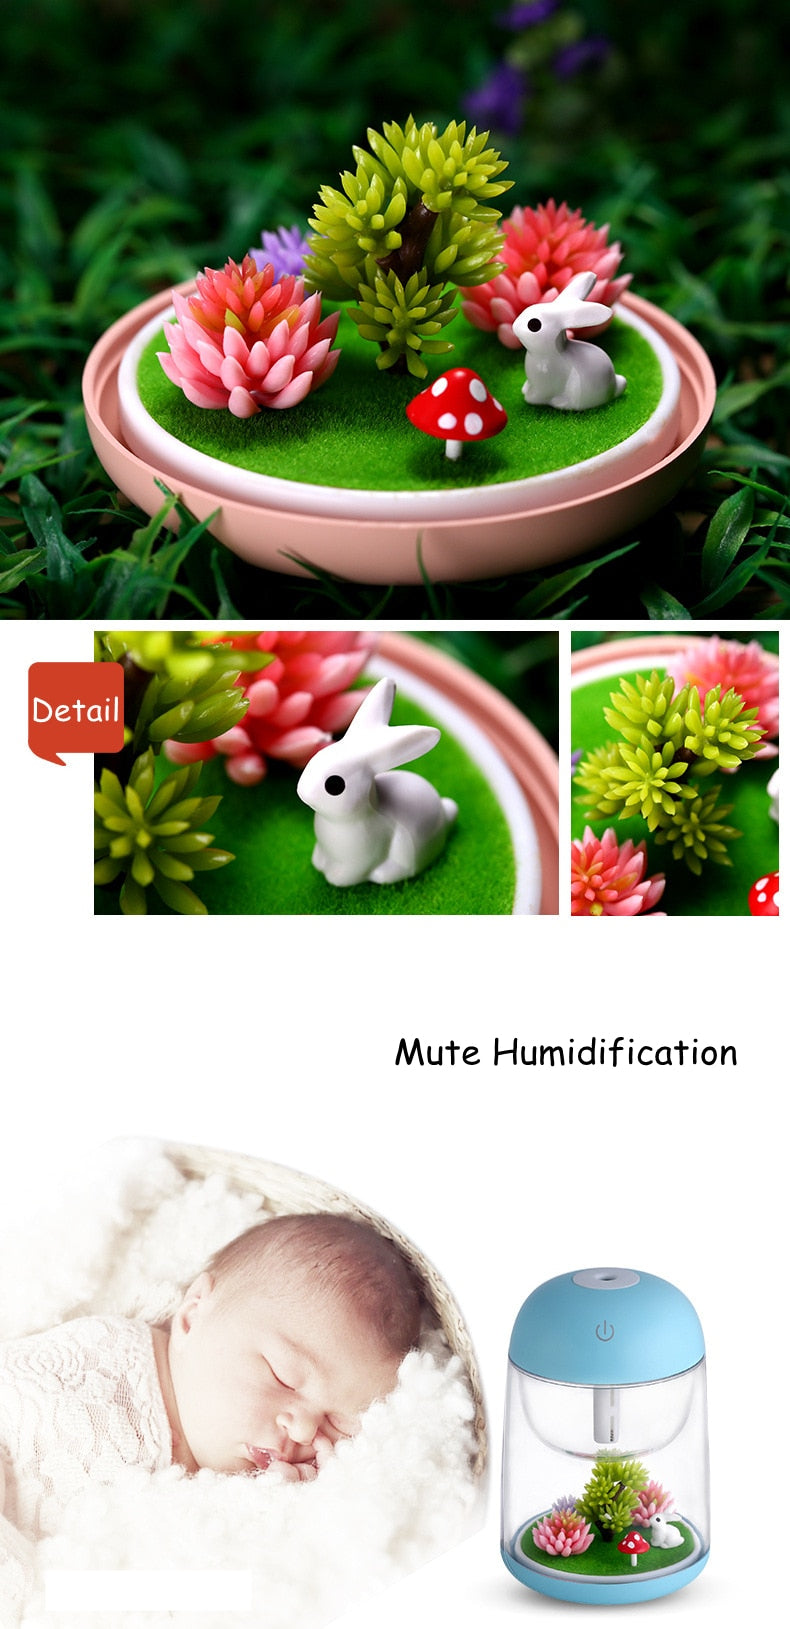 LED Micro-Garden Humidifier - Floral Fawna